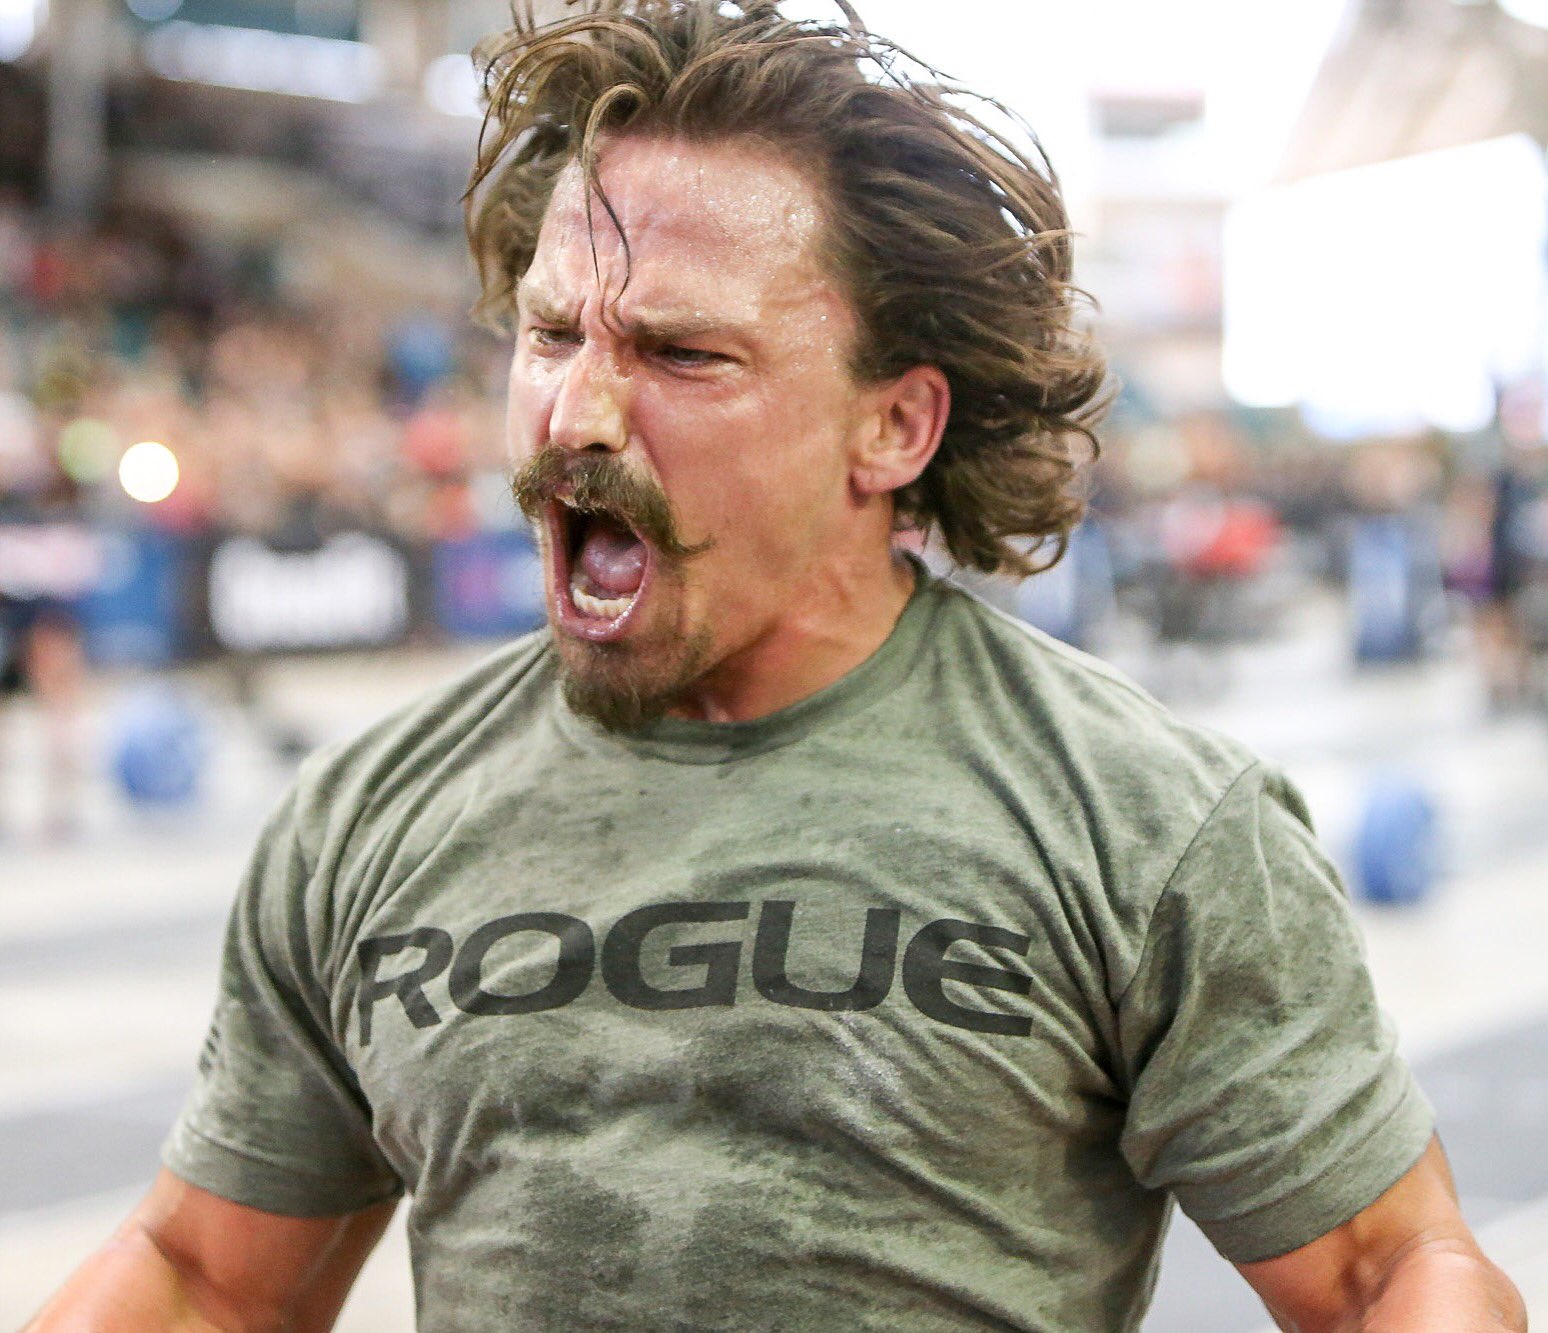 The CrossFit Games on Twitter: "With his second event win of the day,  @bridgesj3 leads all @CFGCalifornia men. https://t.co/Gqk765oIHN" / Twitter